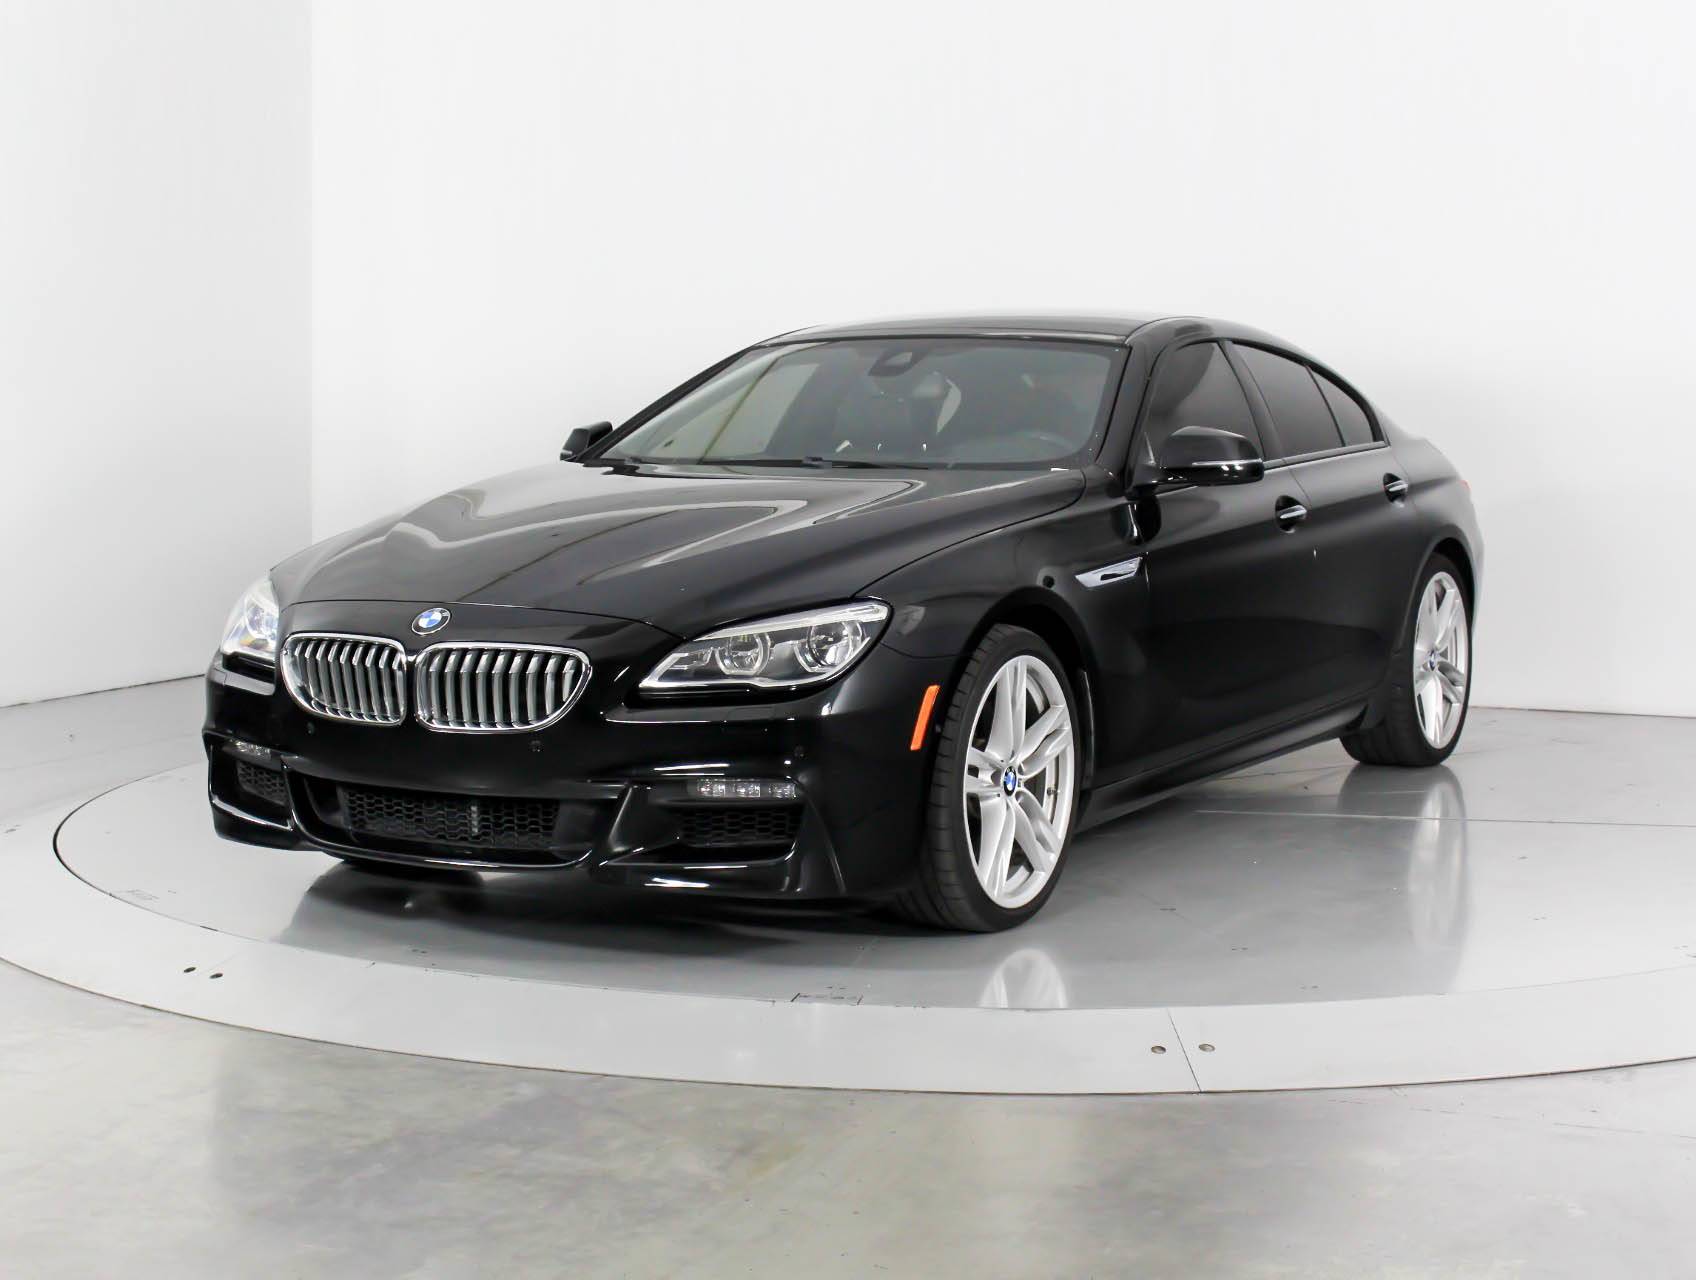 Florida Fine Cars - Used BMW 6 SERIES 2016 WEST PALM 650I XDRIVE GRAN COUPE